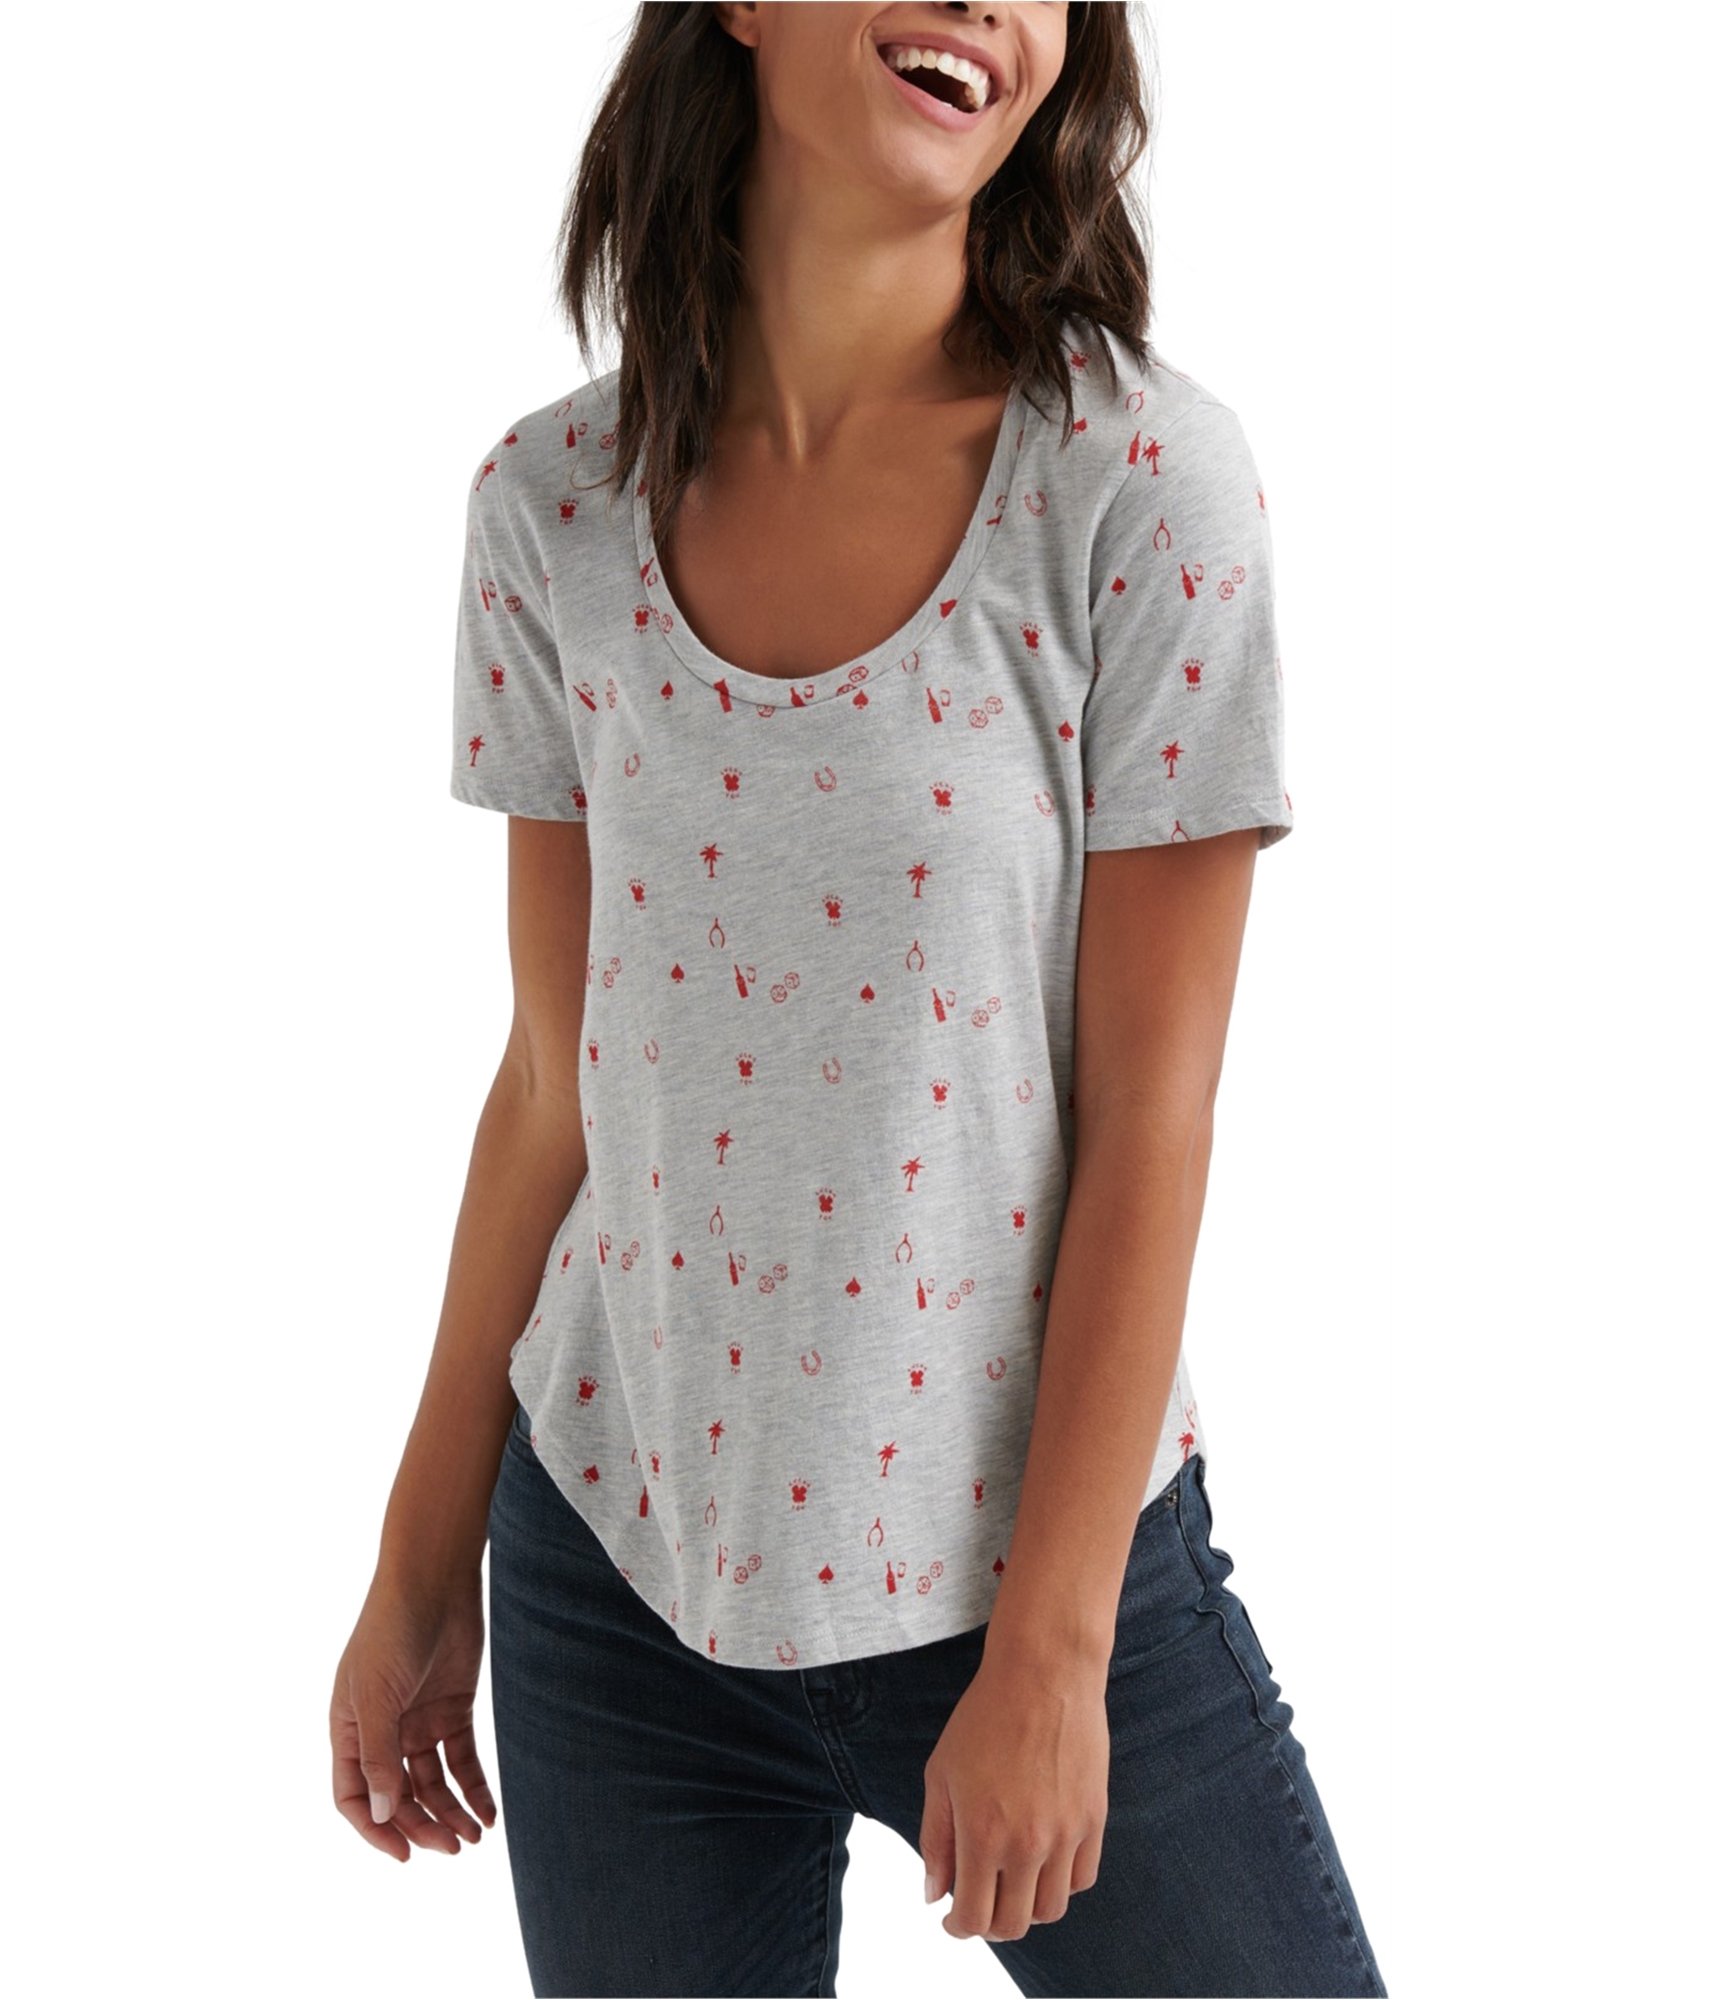 Buy a Lucky Brand Womens Dice Graphic T-Shirt